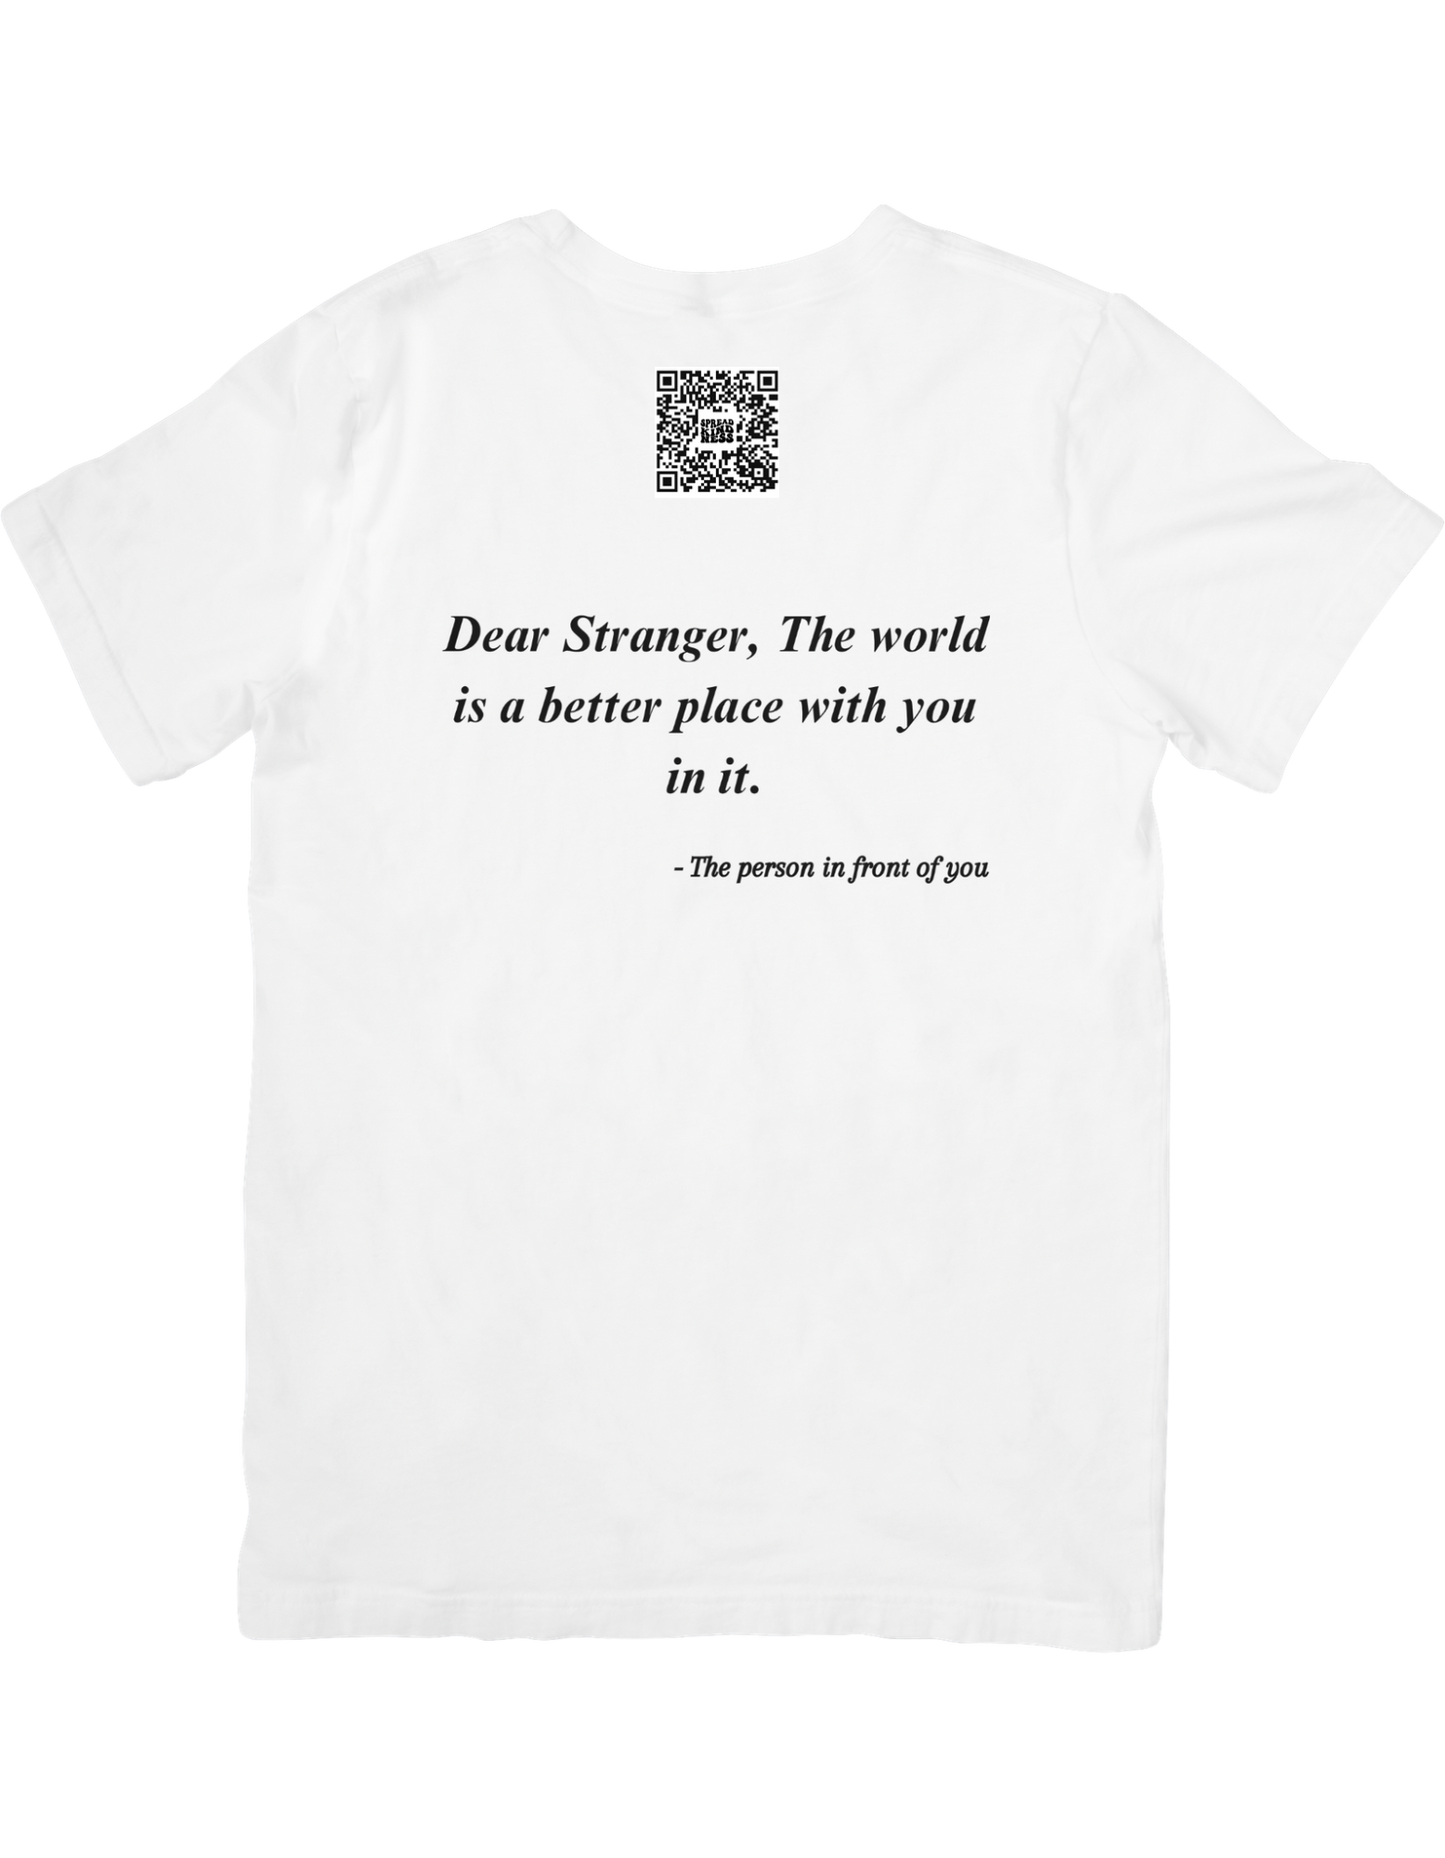 QR code T-Shirt
 “The world is a better place with you in it.”